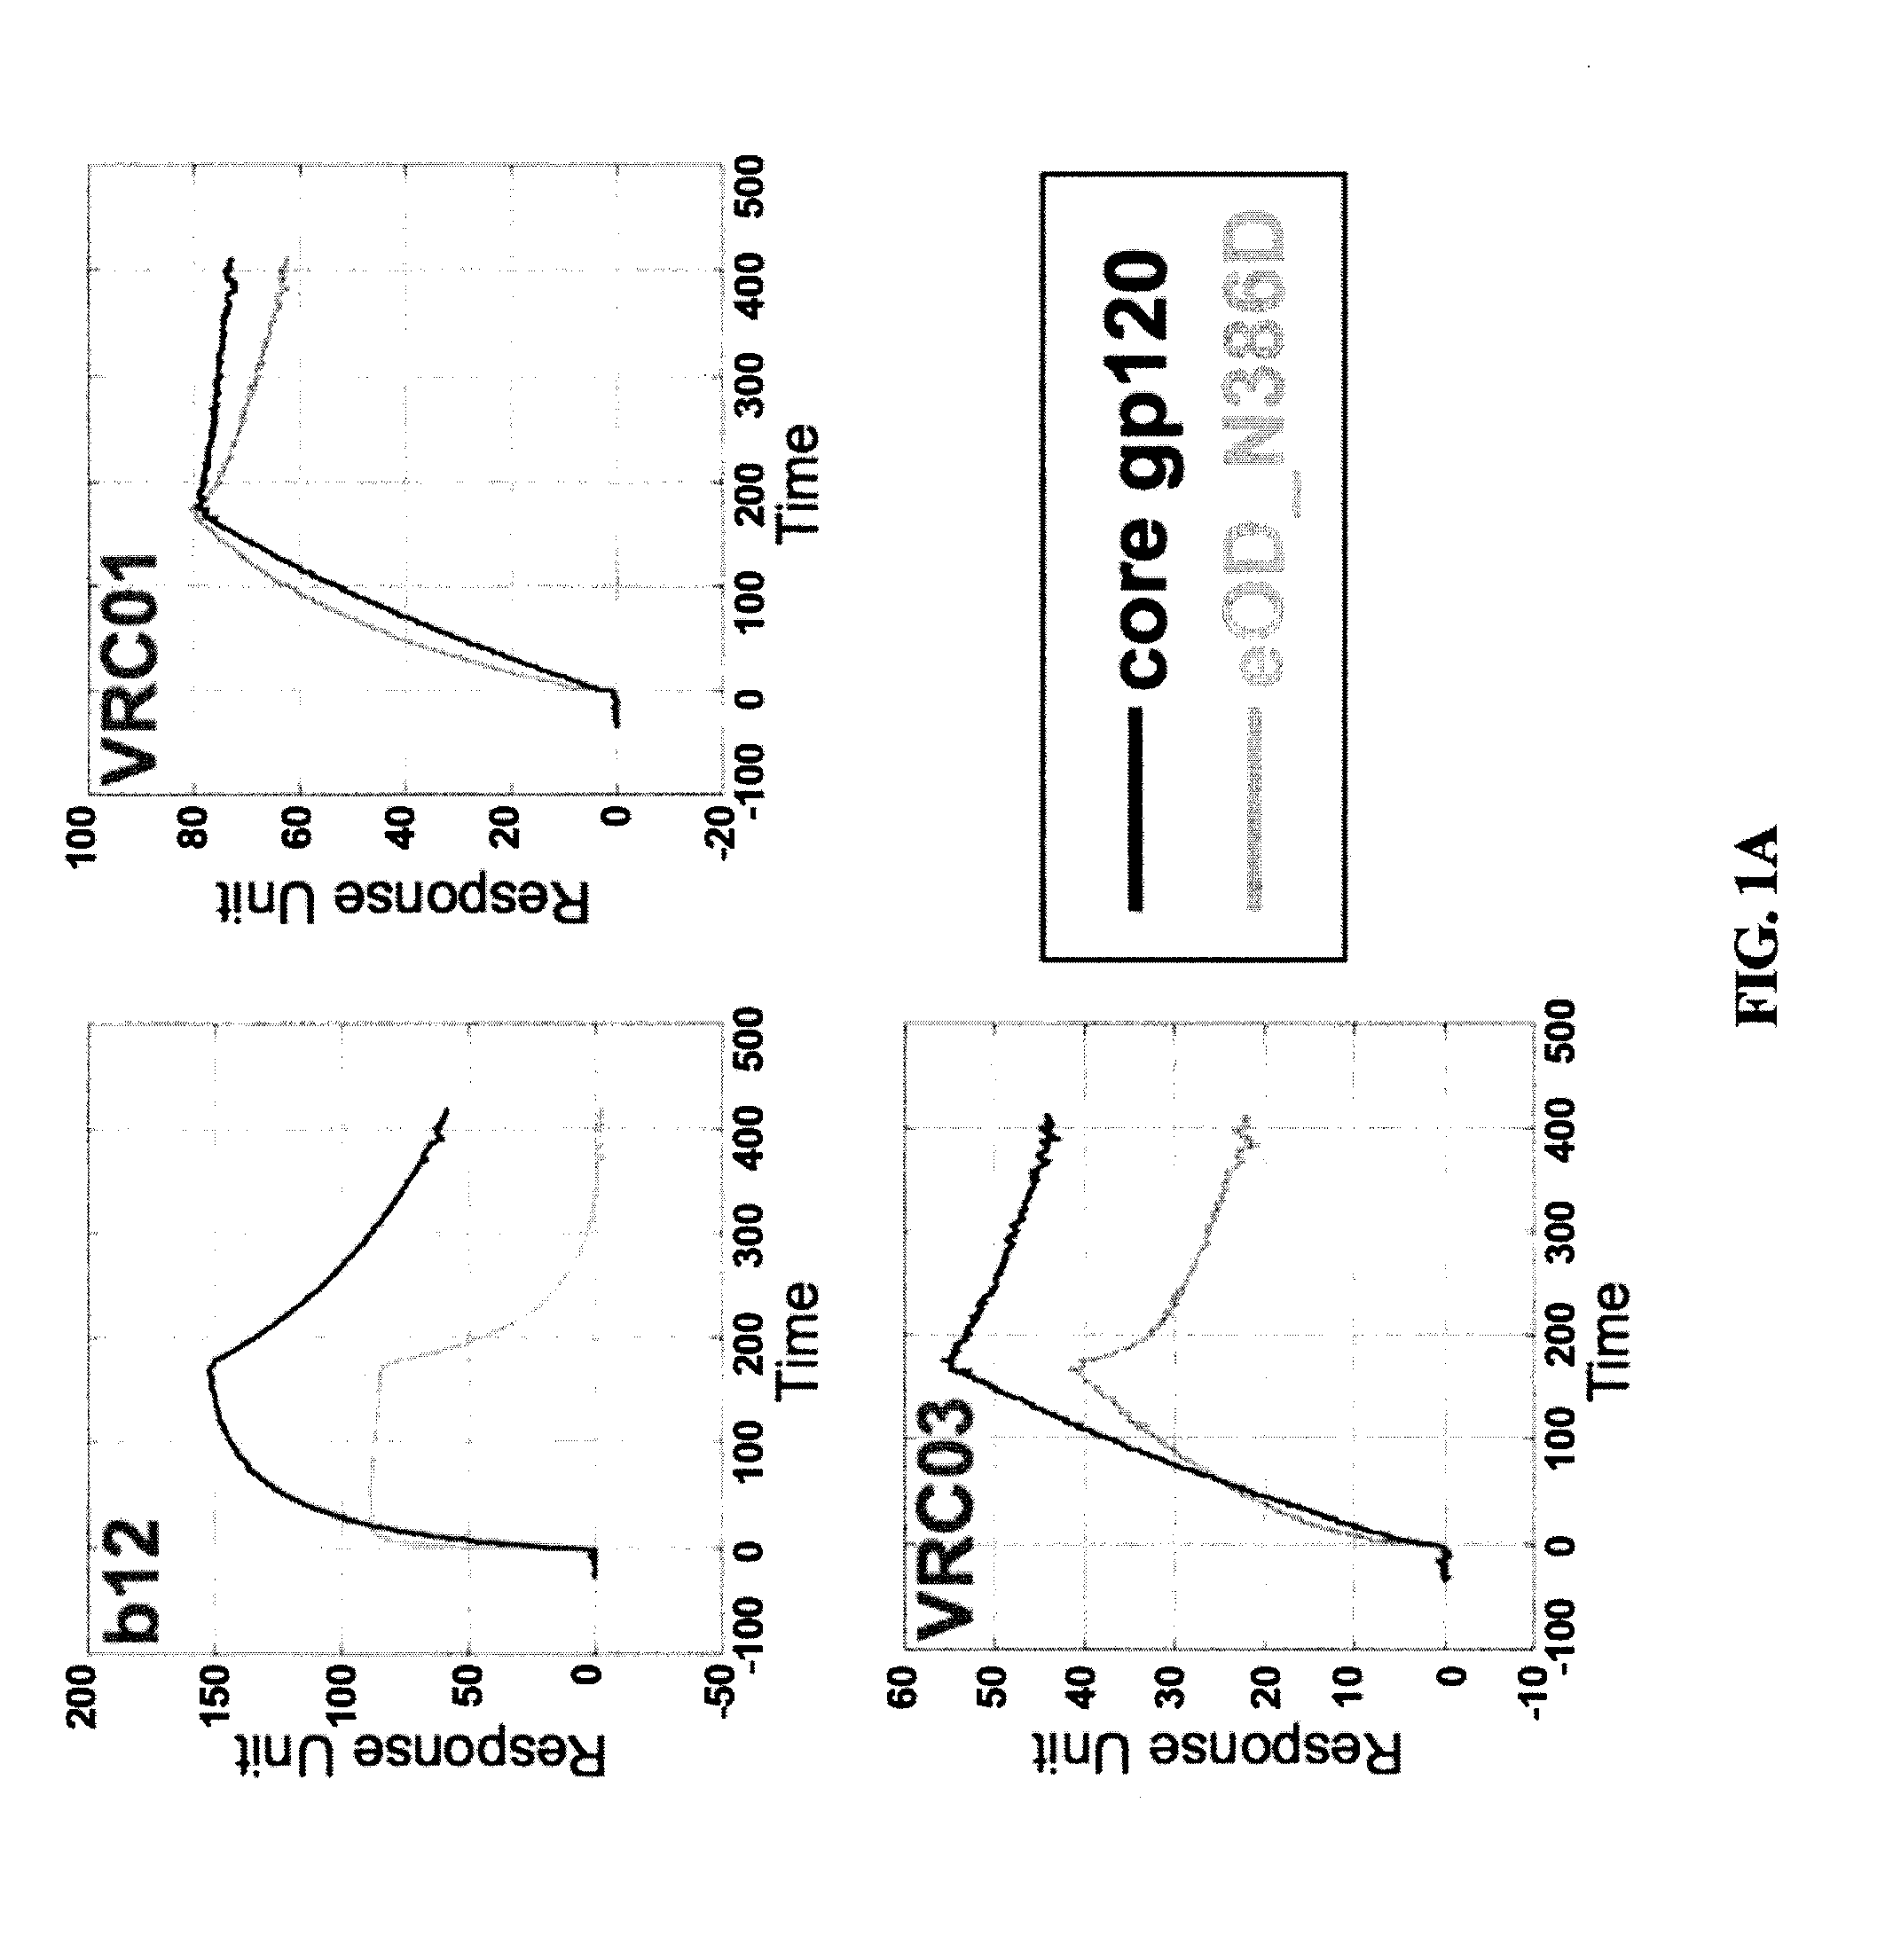 Engineered outer domain (EOD) of HIV gp120 and mutants thereof